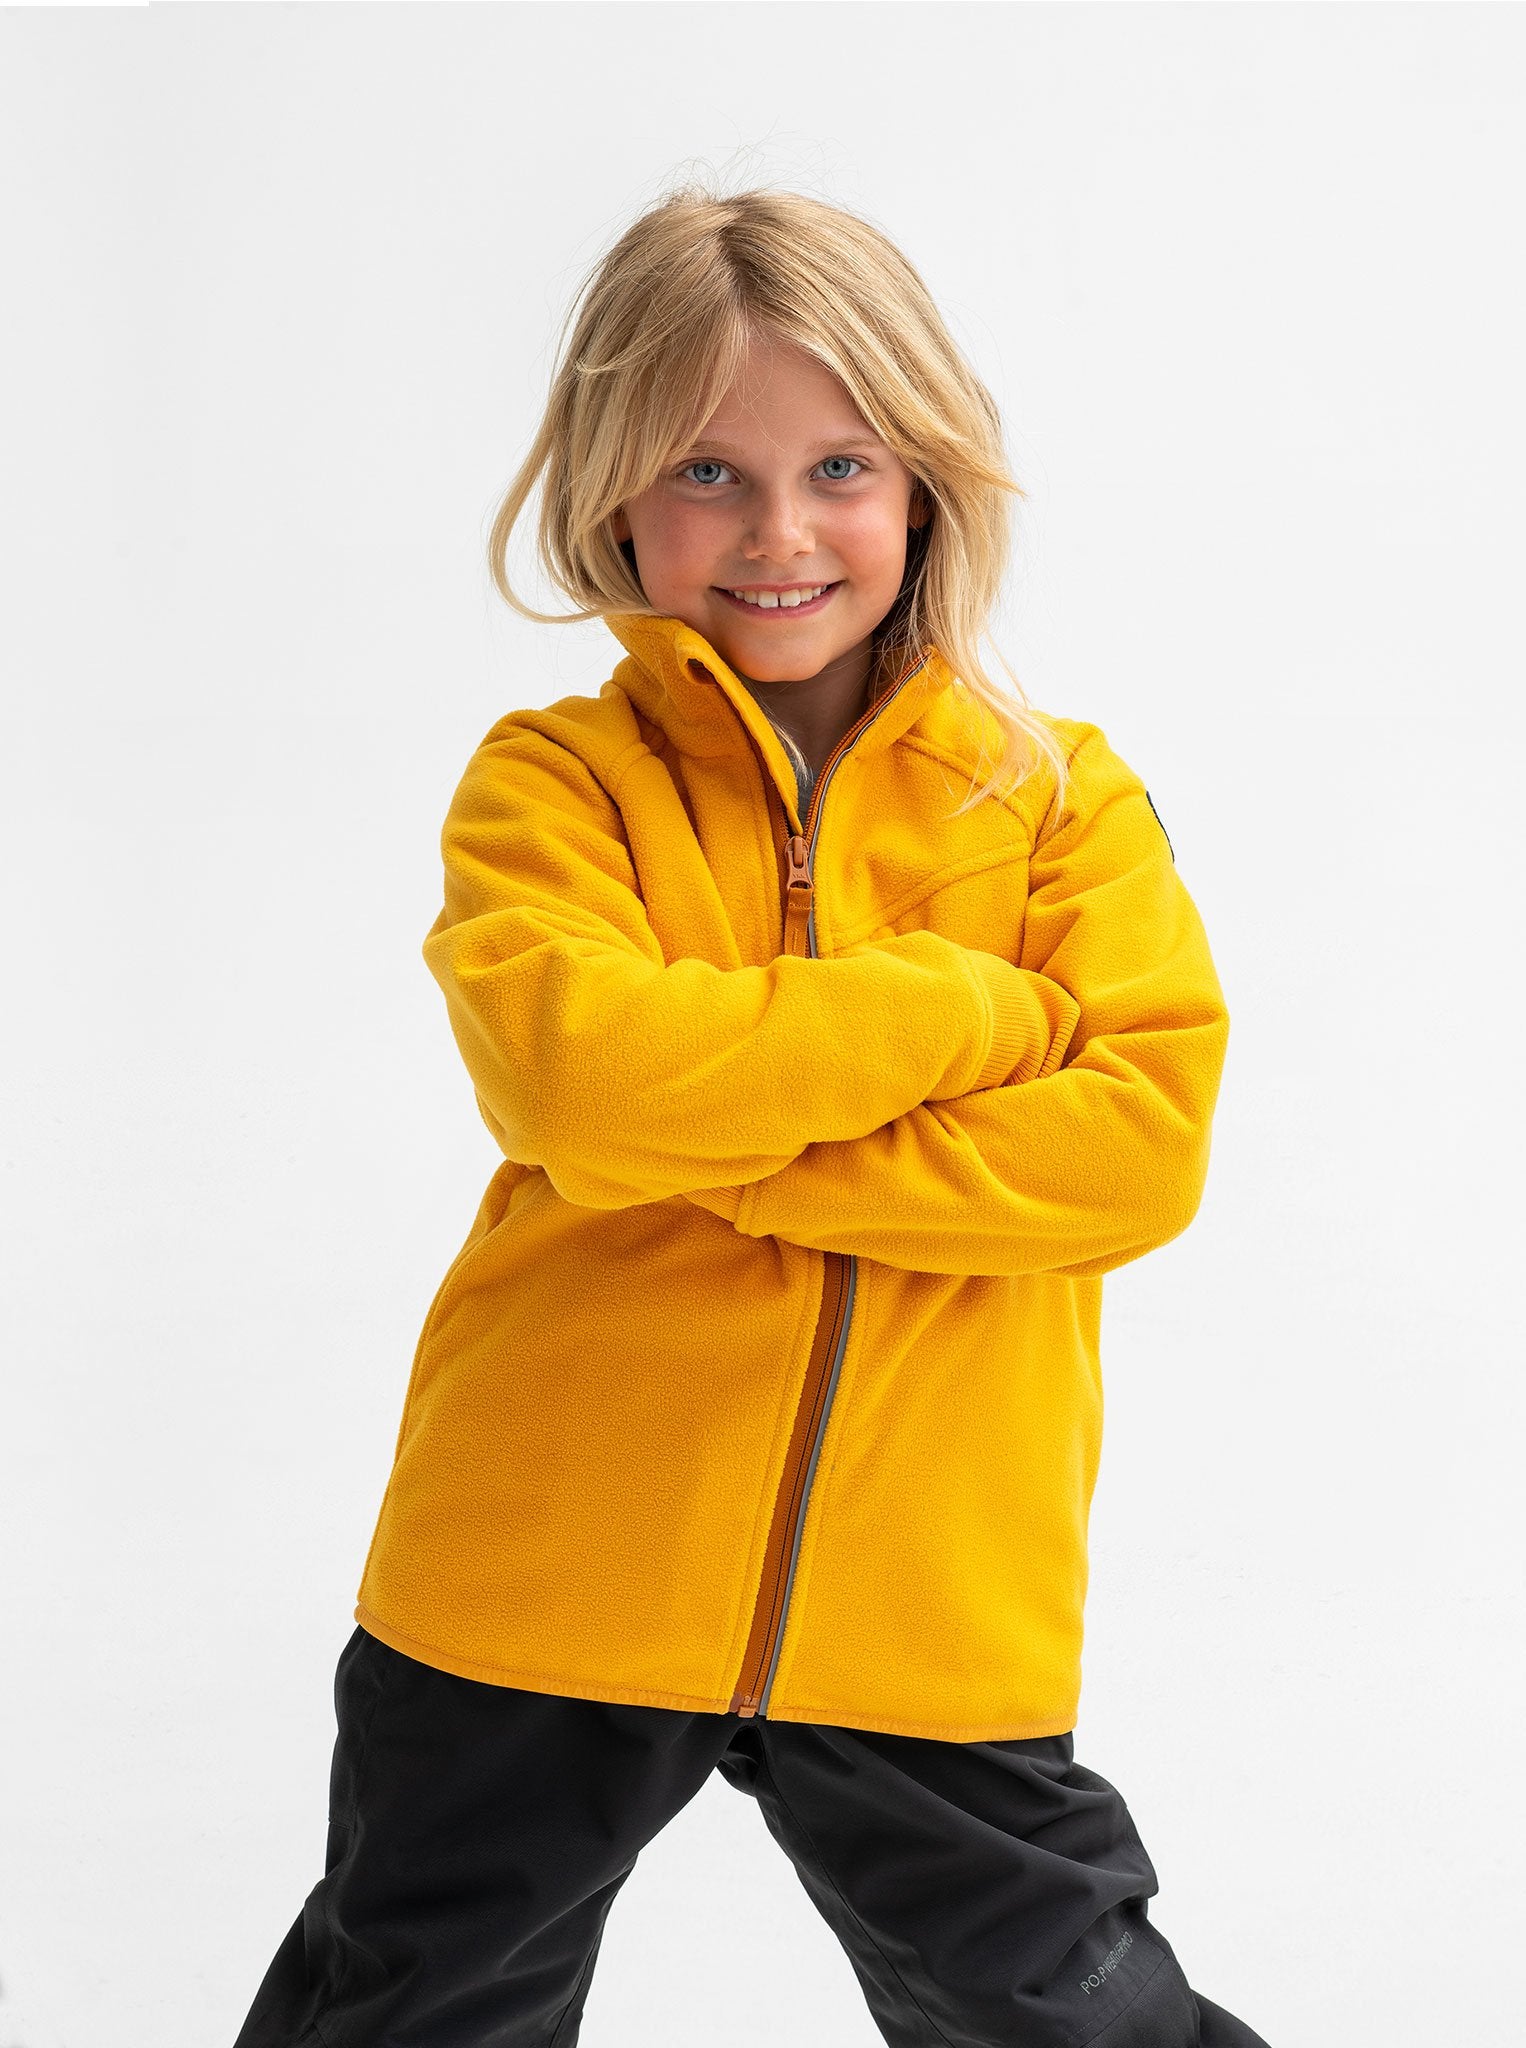 A young girl sporting a yellow, kids waterproof fleece jacket, with zip reflectors and cuff thumbholes, made of soft fabric.